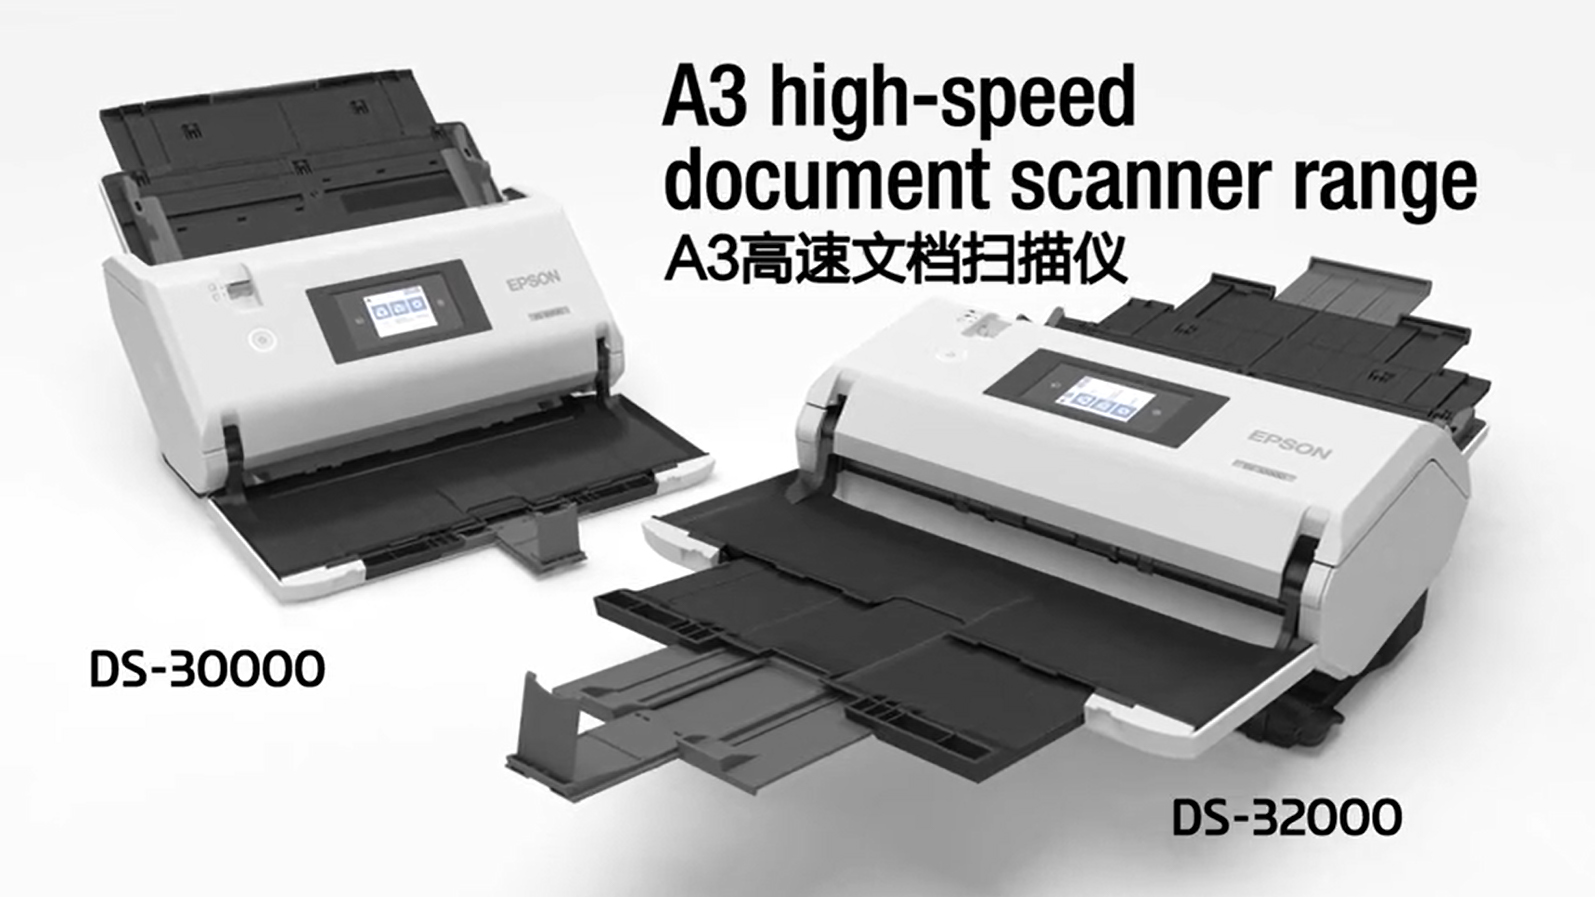 EPSON_PRODUCTS_Epson DS-30000